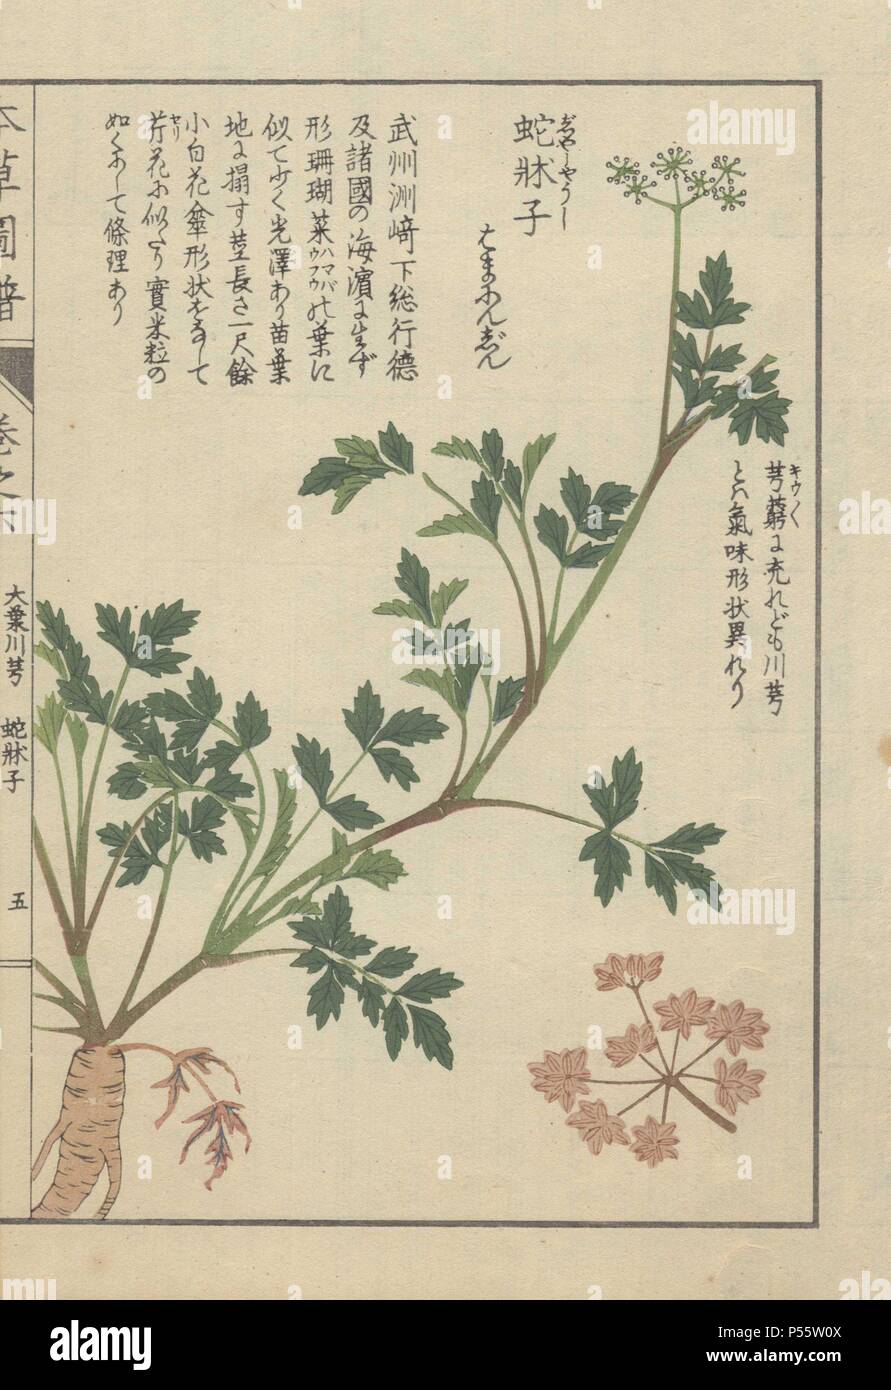 Roots, stems, leaves and tiny florets of Japanese snowparsley. Cnidium japonicum. Jashouji. Colour-printed woodblock engraving by Kan'en Iwasaki from 'Honzo Zufu,' an Illustrated Guide to Medicinal Plants, 1884. Iwasaki (1786-1842) was a Japanese botanist, entomologist and zoologist. He was one of the first Japanese botanists to incorporate western knowledge into his studies. Stock Photo